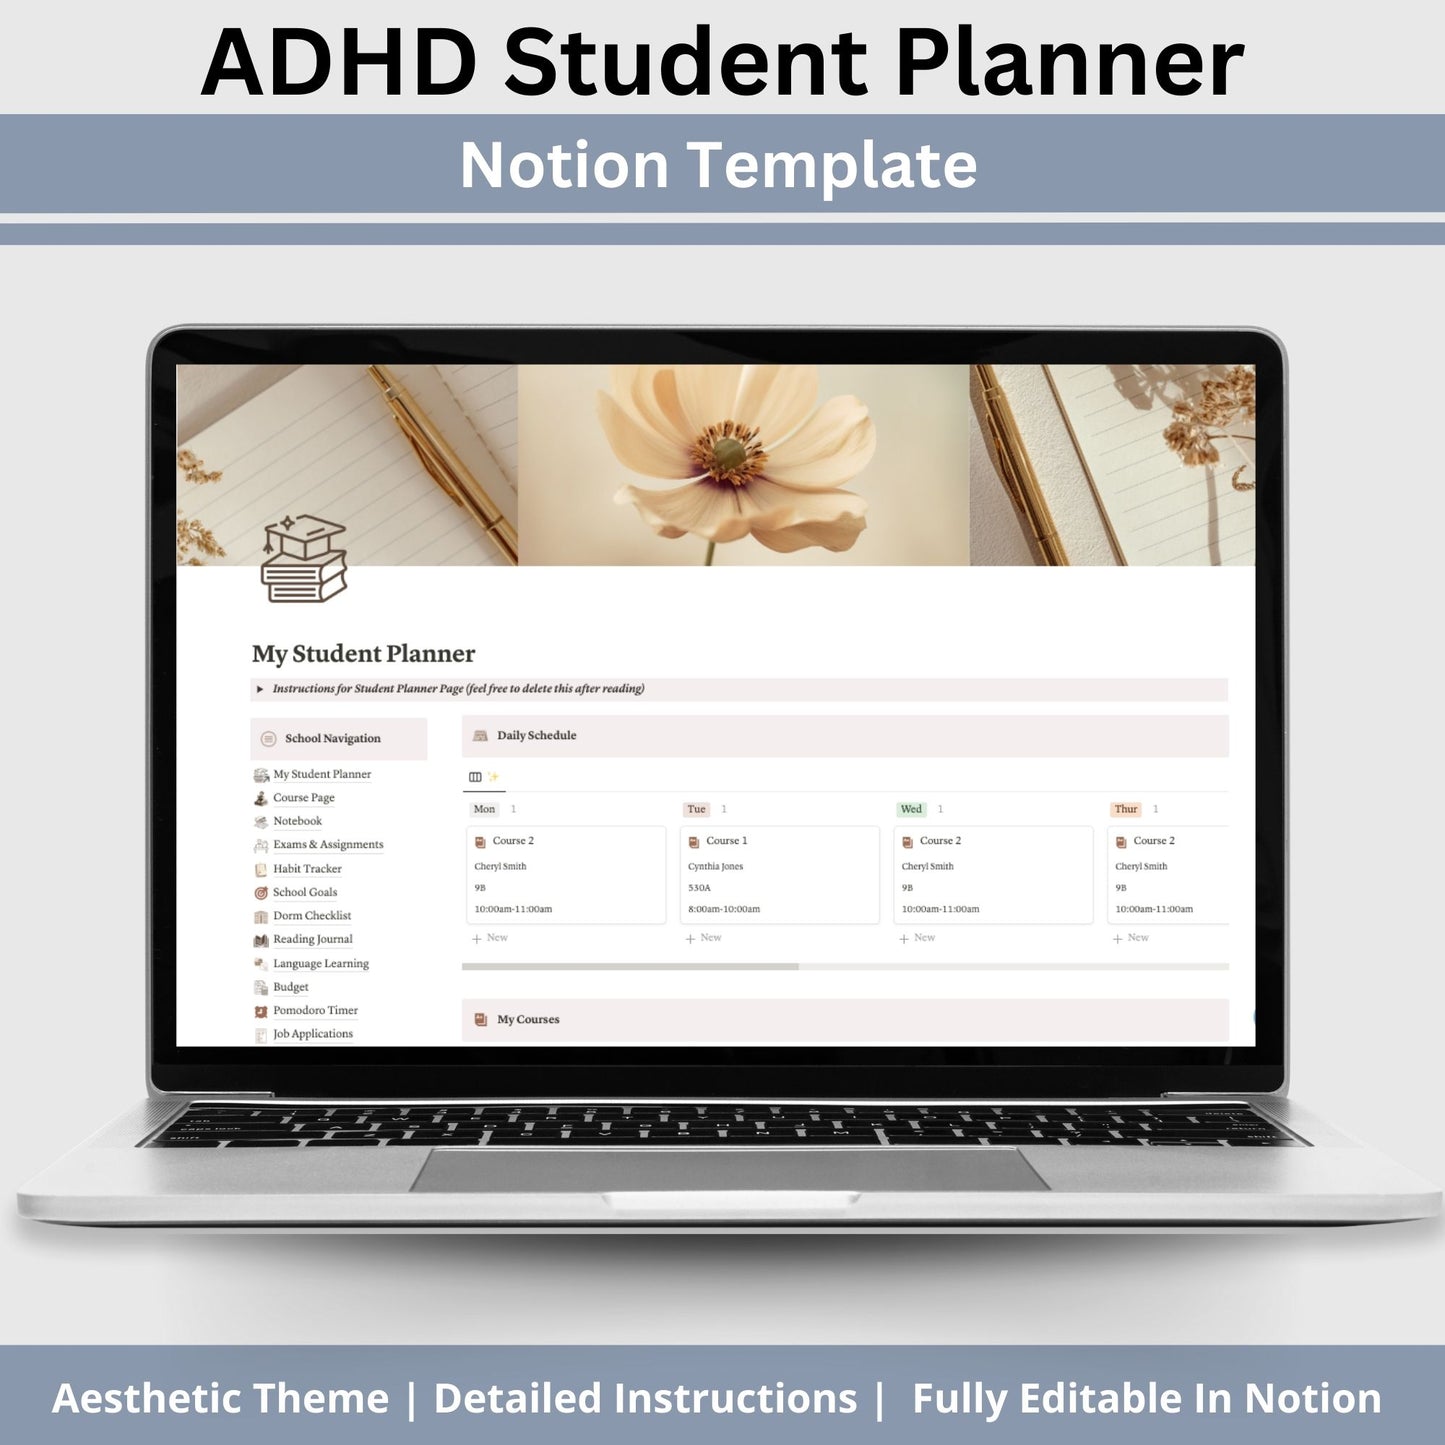 Notion Student Planner designed with ADHD in mind! This unique and customizable digital planner is crafted specifically to help students with ADHD stay organized, focused, and motivated throughout their academic journey. 